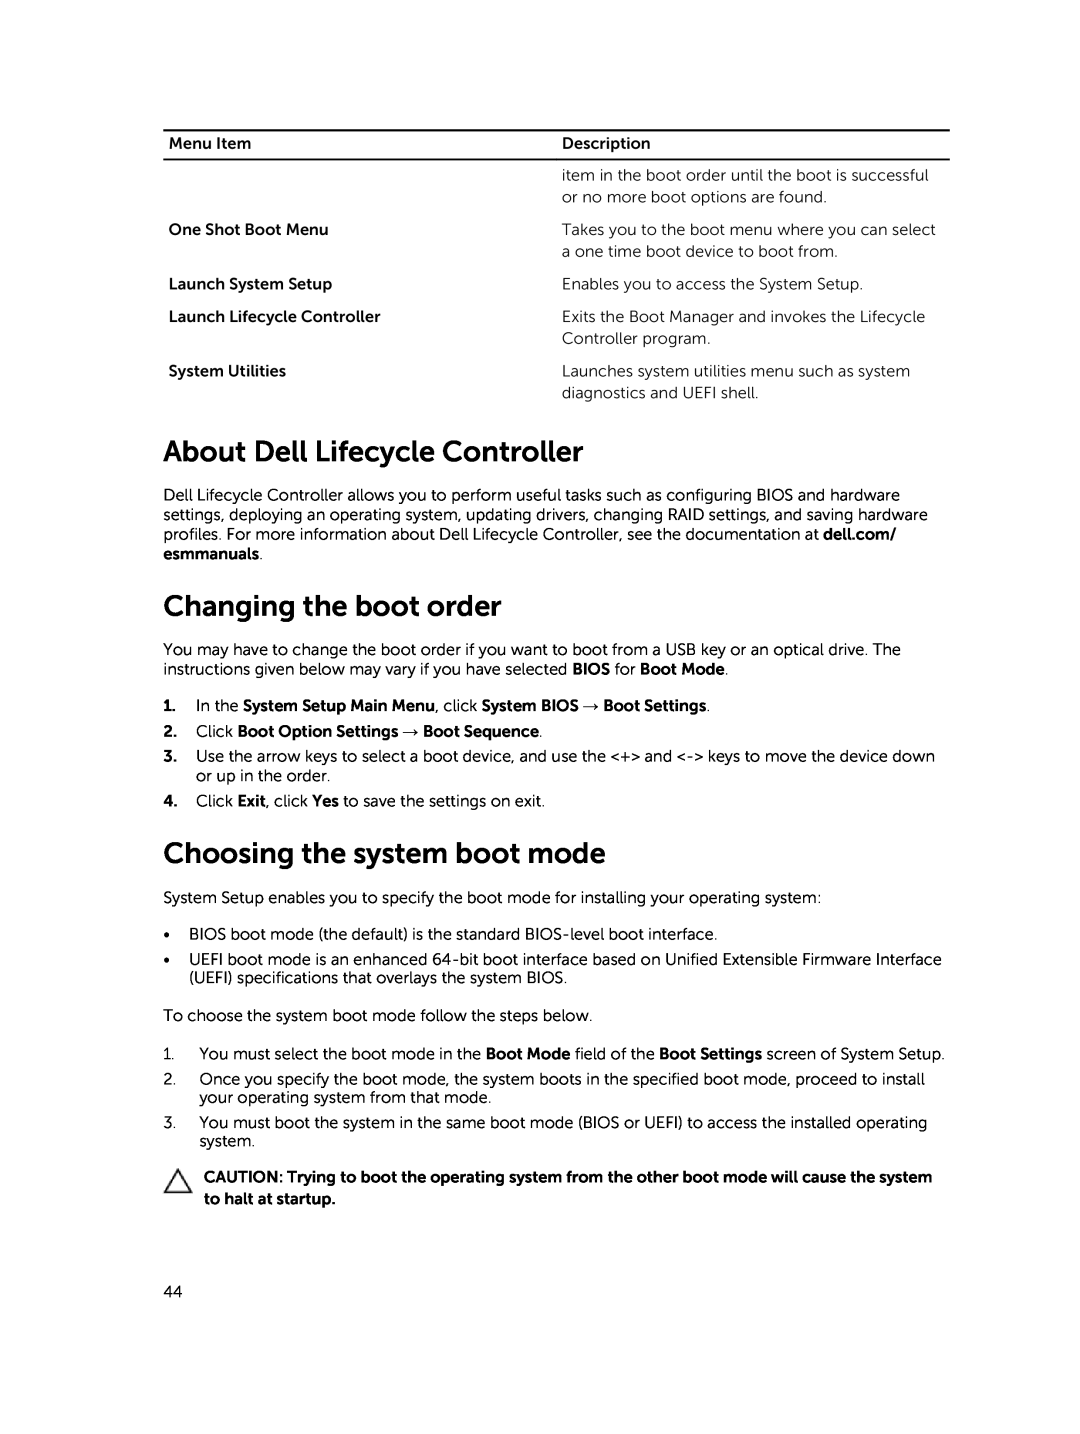 Dell E30S owner manual About Dell Lifecycle Controller, Changing the boot order, Choosing the system boot mode 